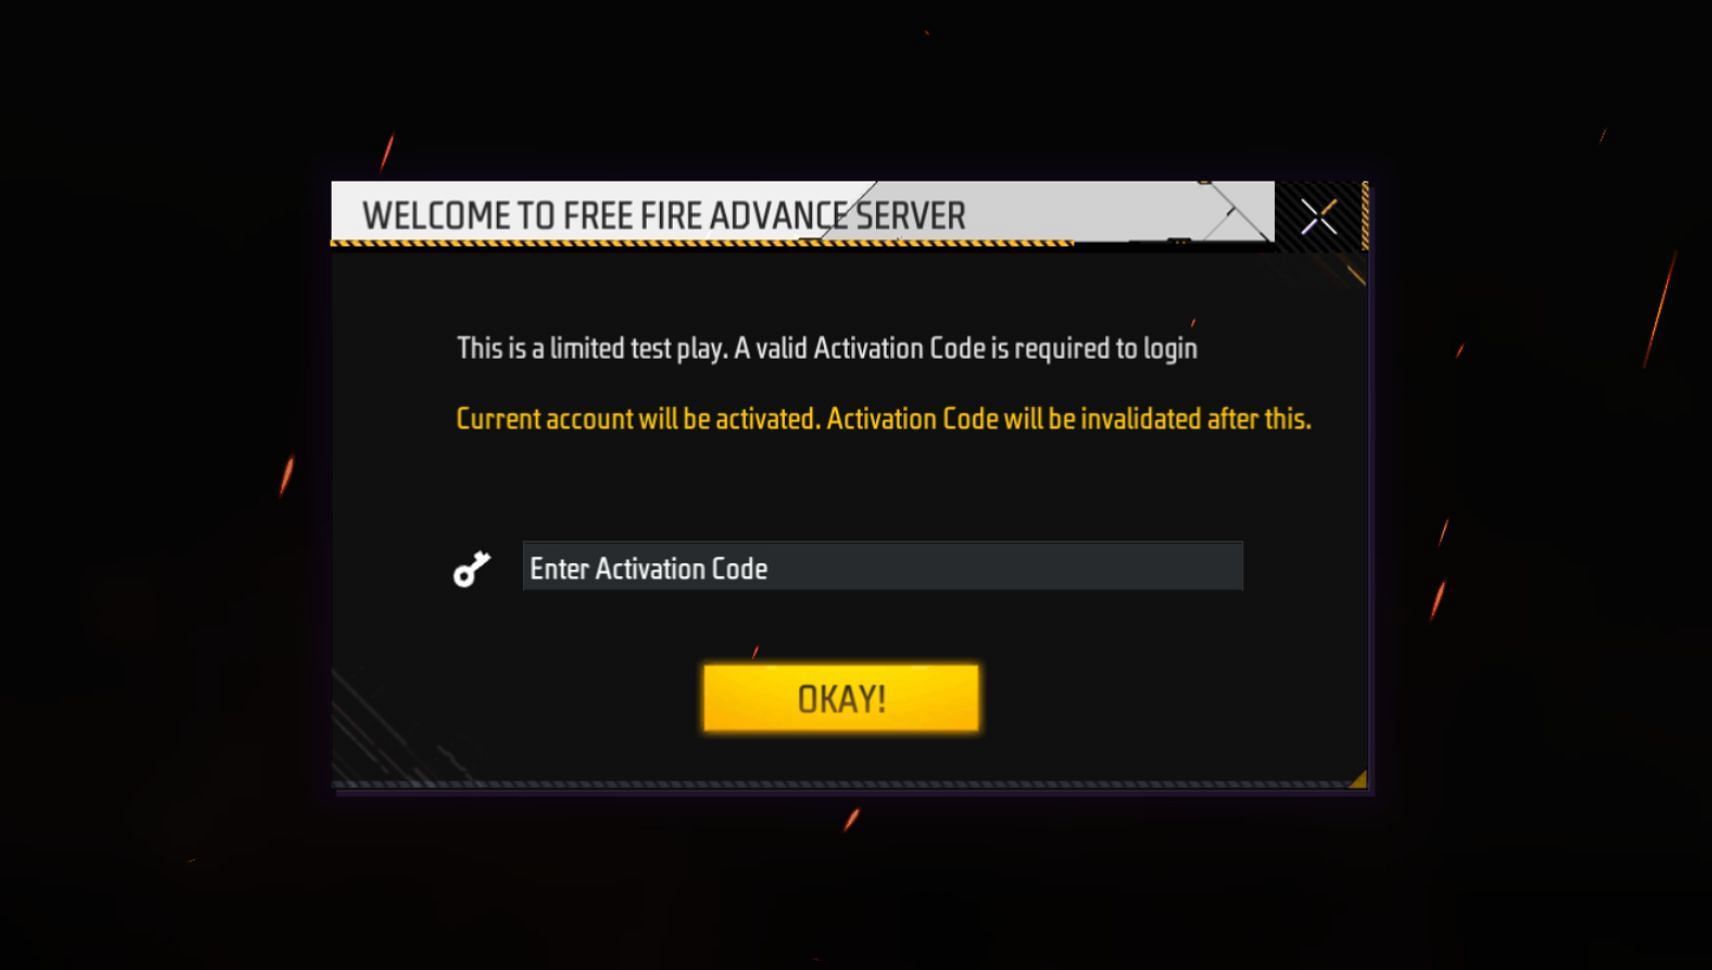 Gamers will need an Activation Code to activate the FF Advance Server (Image via Garena)